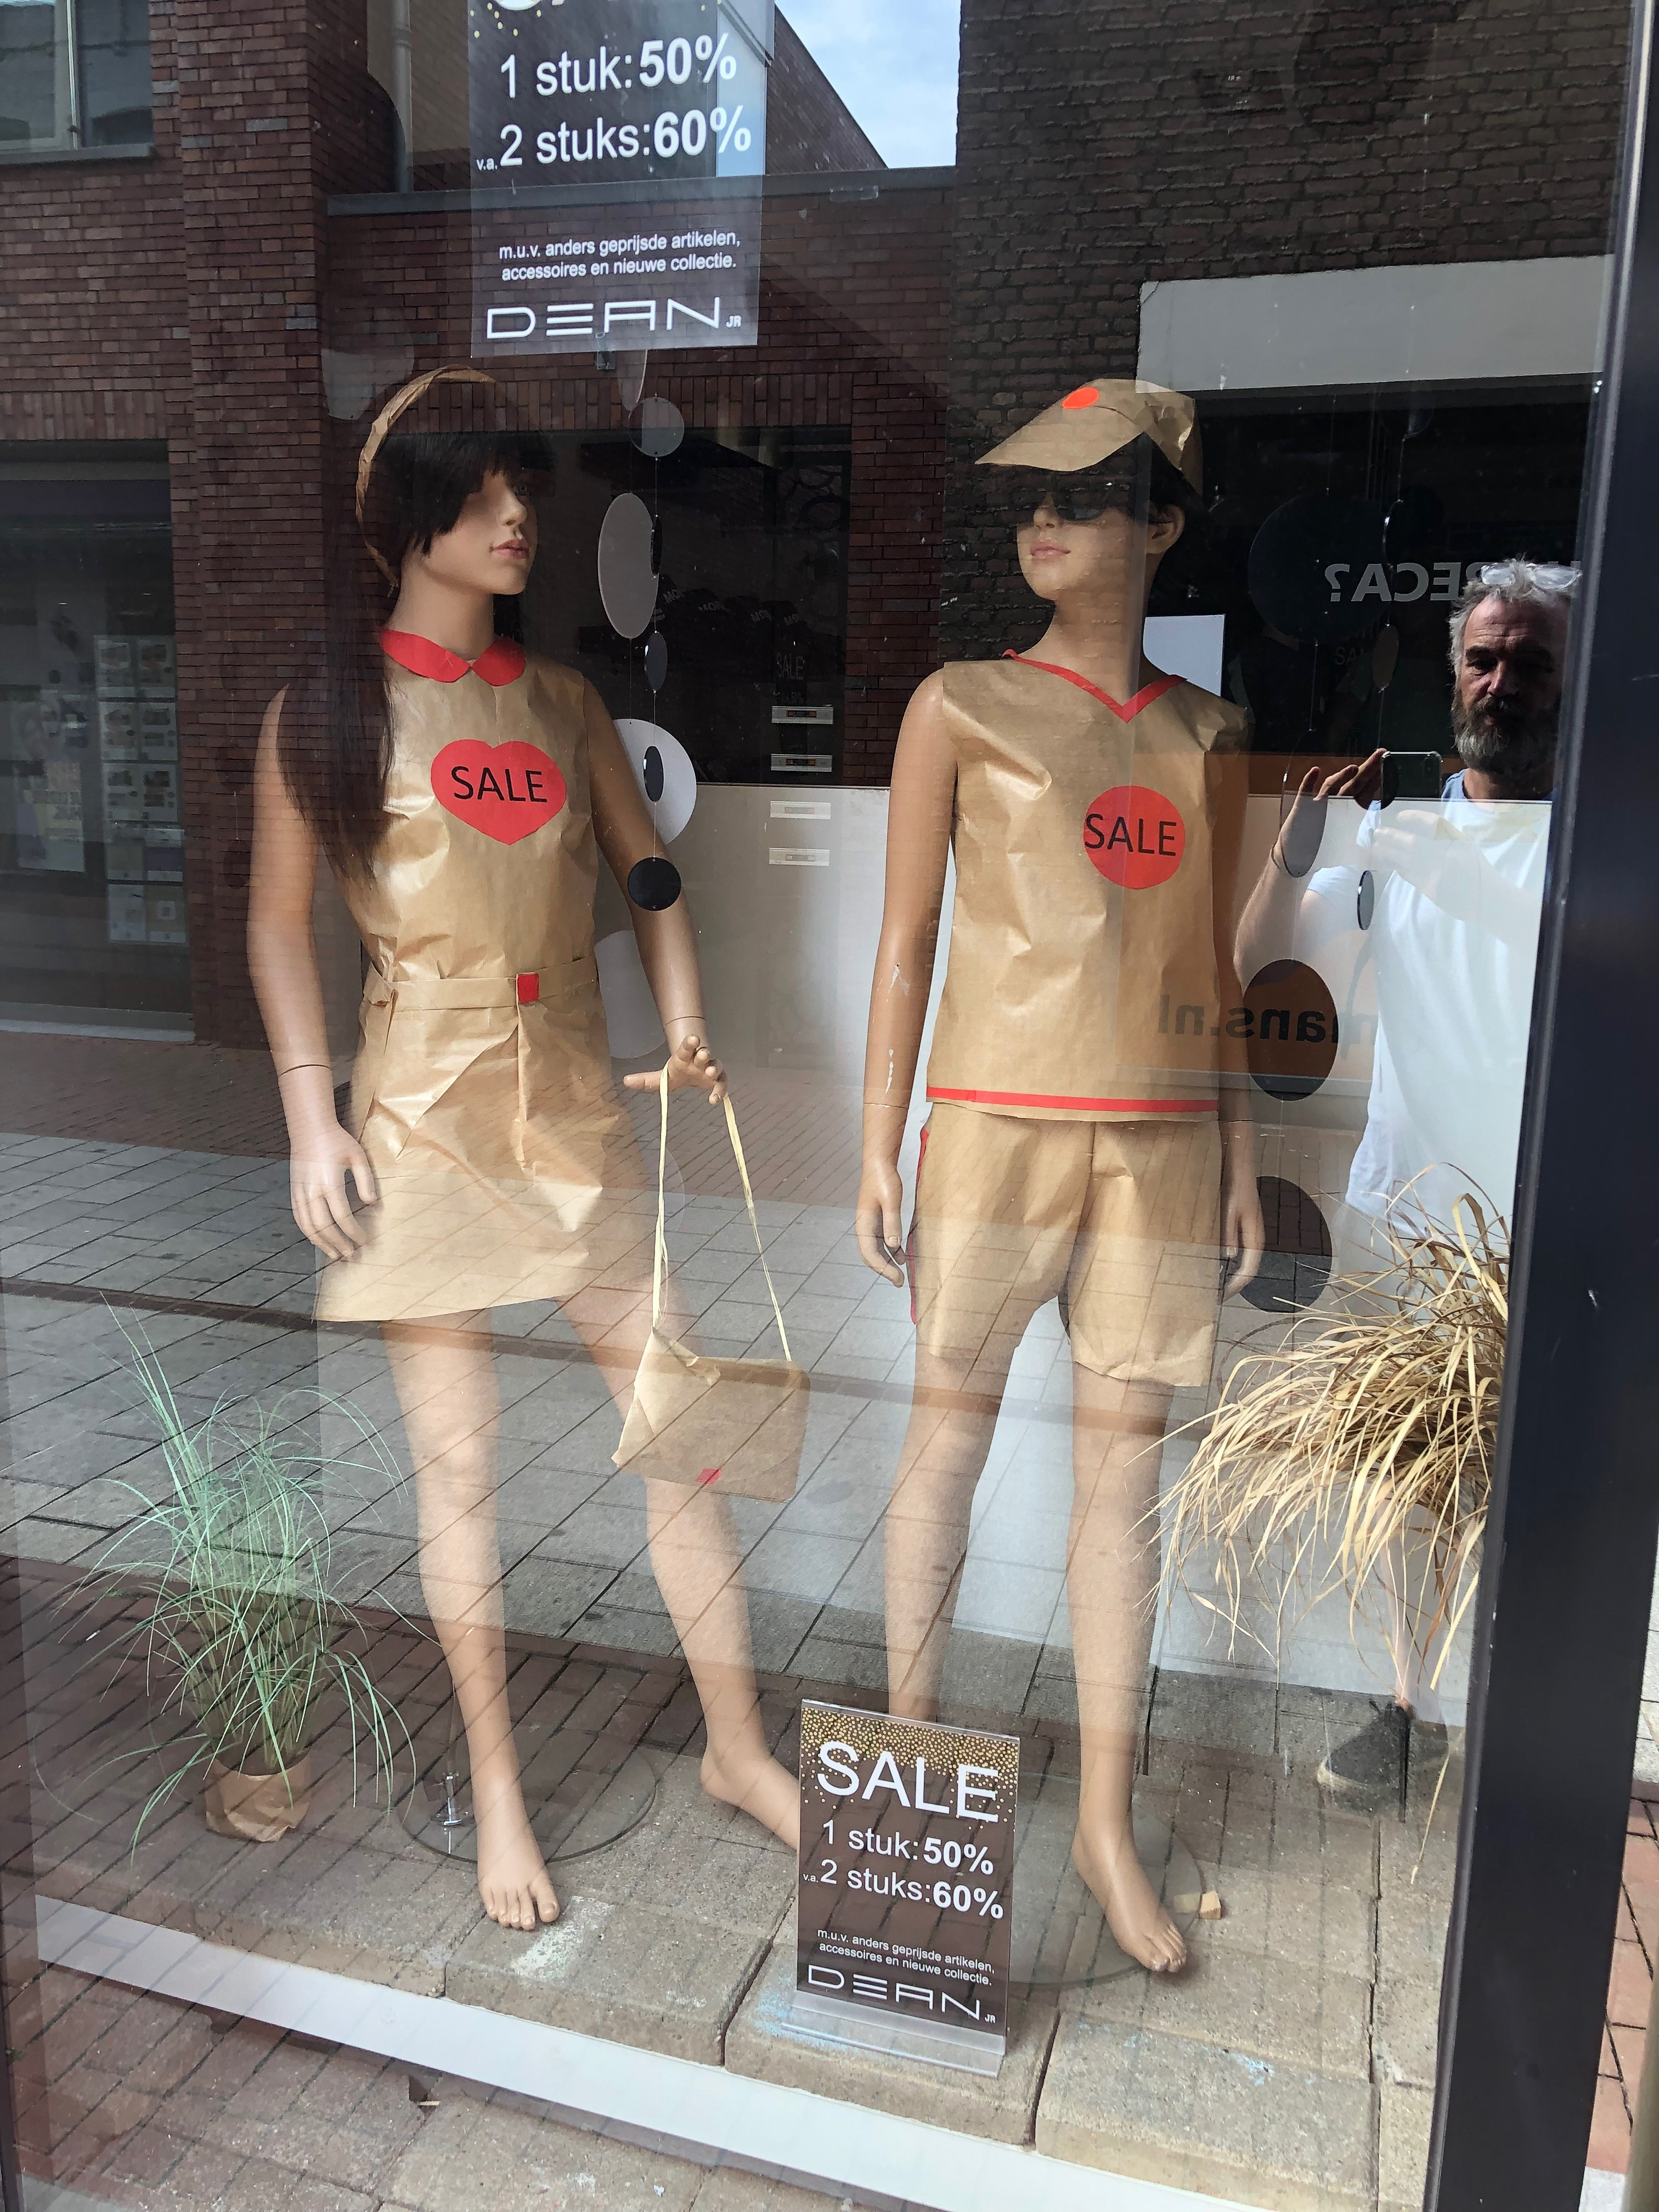 "Less is more..." (window mannequins in wrapping paper)